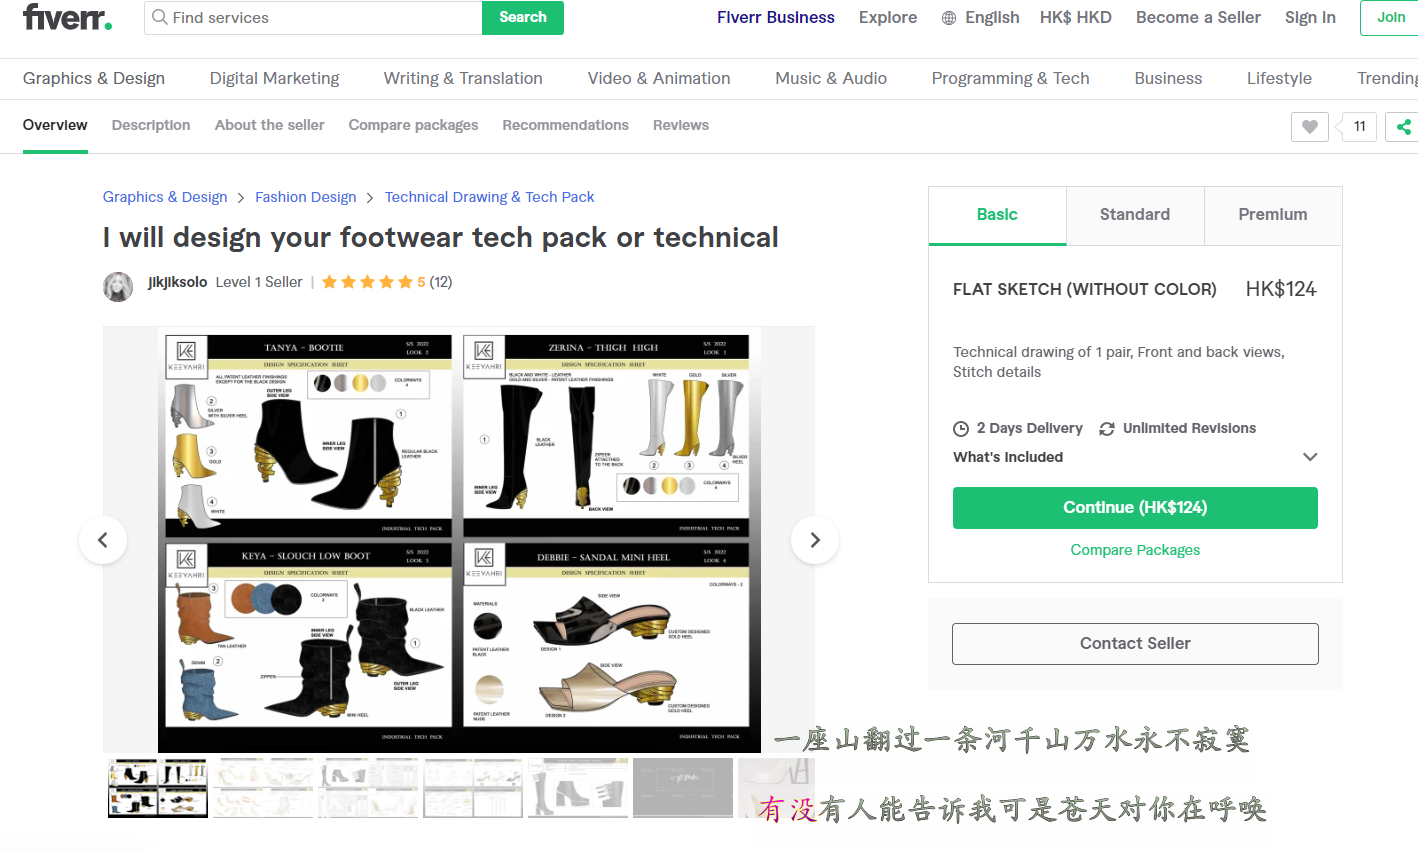 https://www.fiverr.com/jikjiksolo/design-your-footwear-tech-pack-or-technical?utm_campaign=ios_delivery&utm_medium=shared&utm_source=&utm_term=